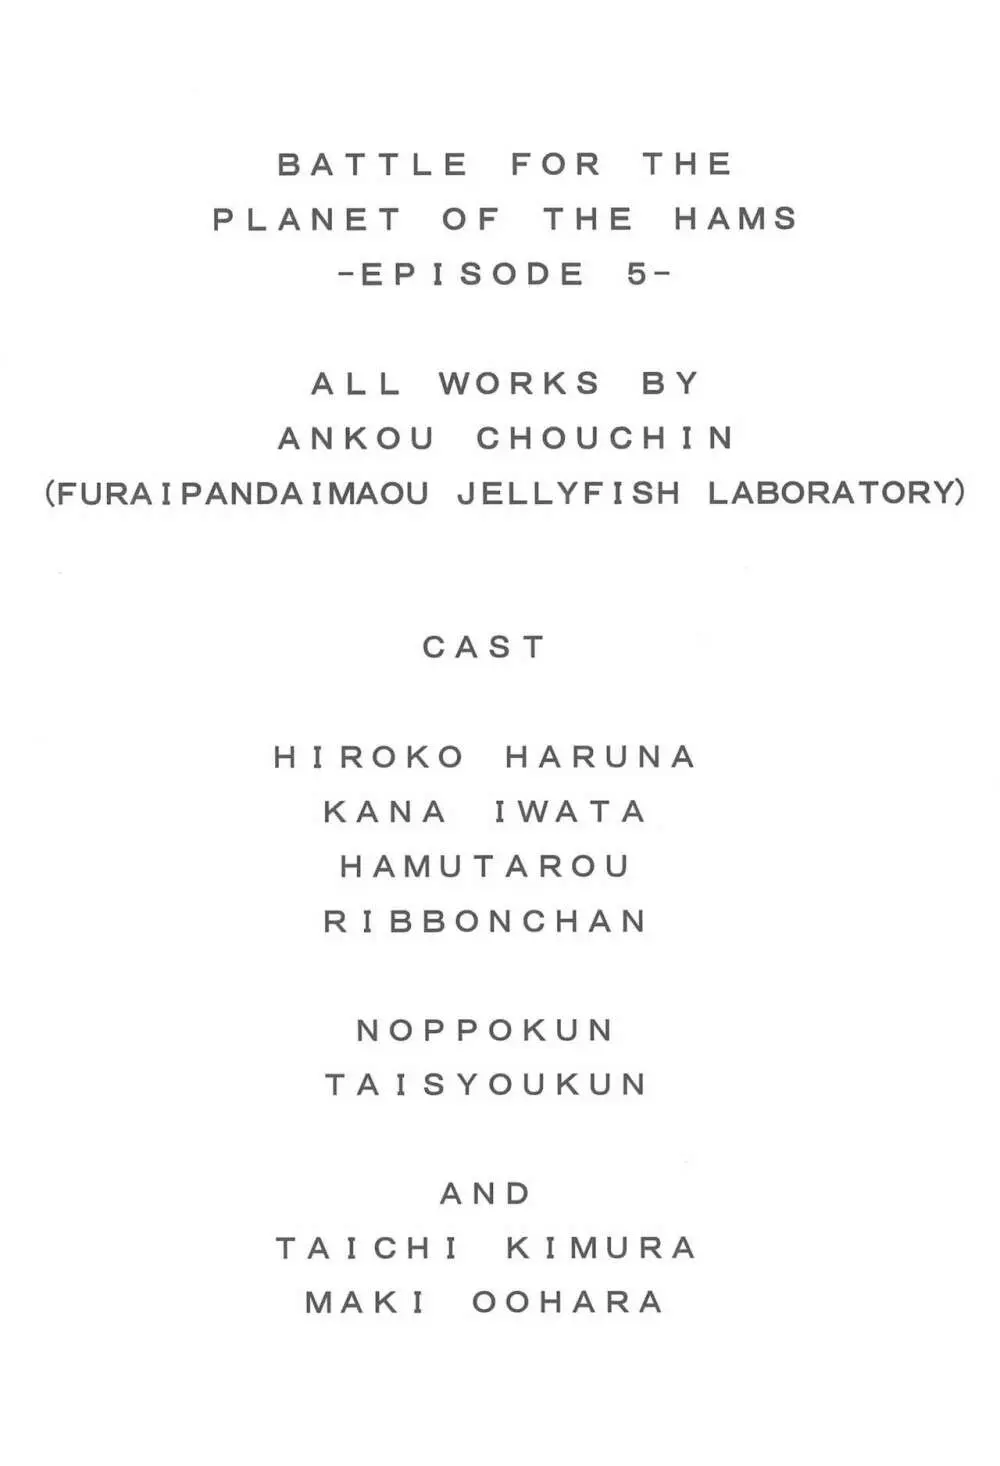 BATTLE FOR THE PLANET OF THE HAMS -EPISODE 5- 4ページ